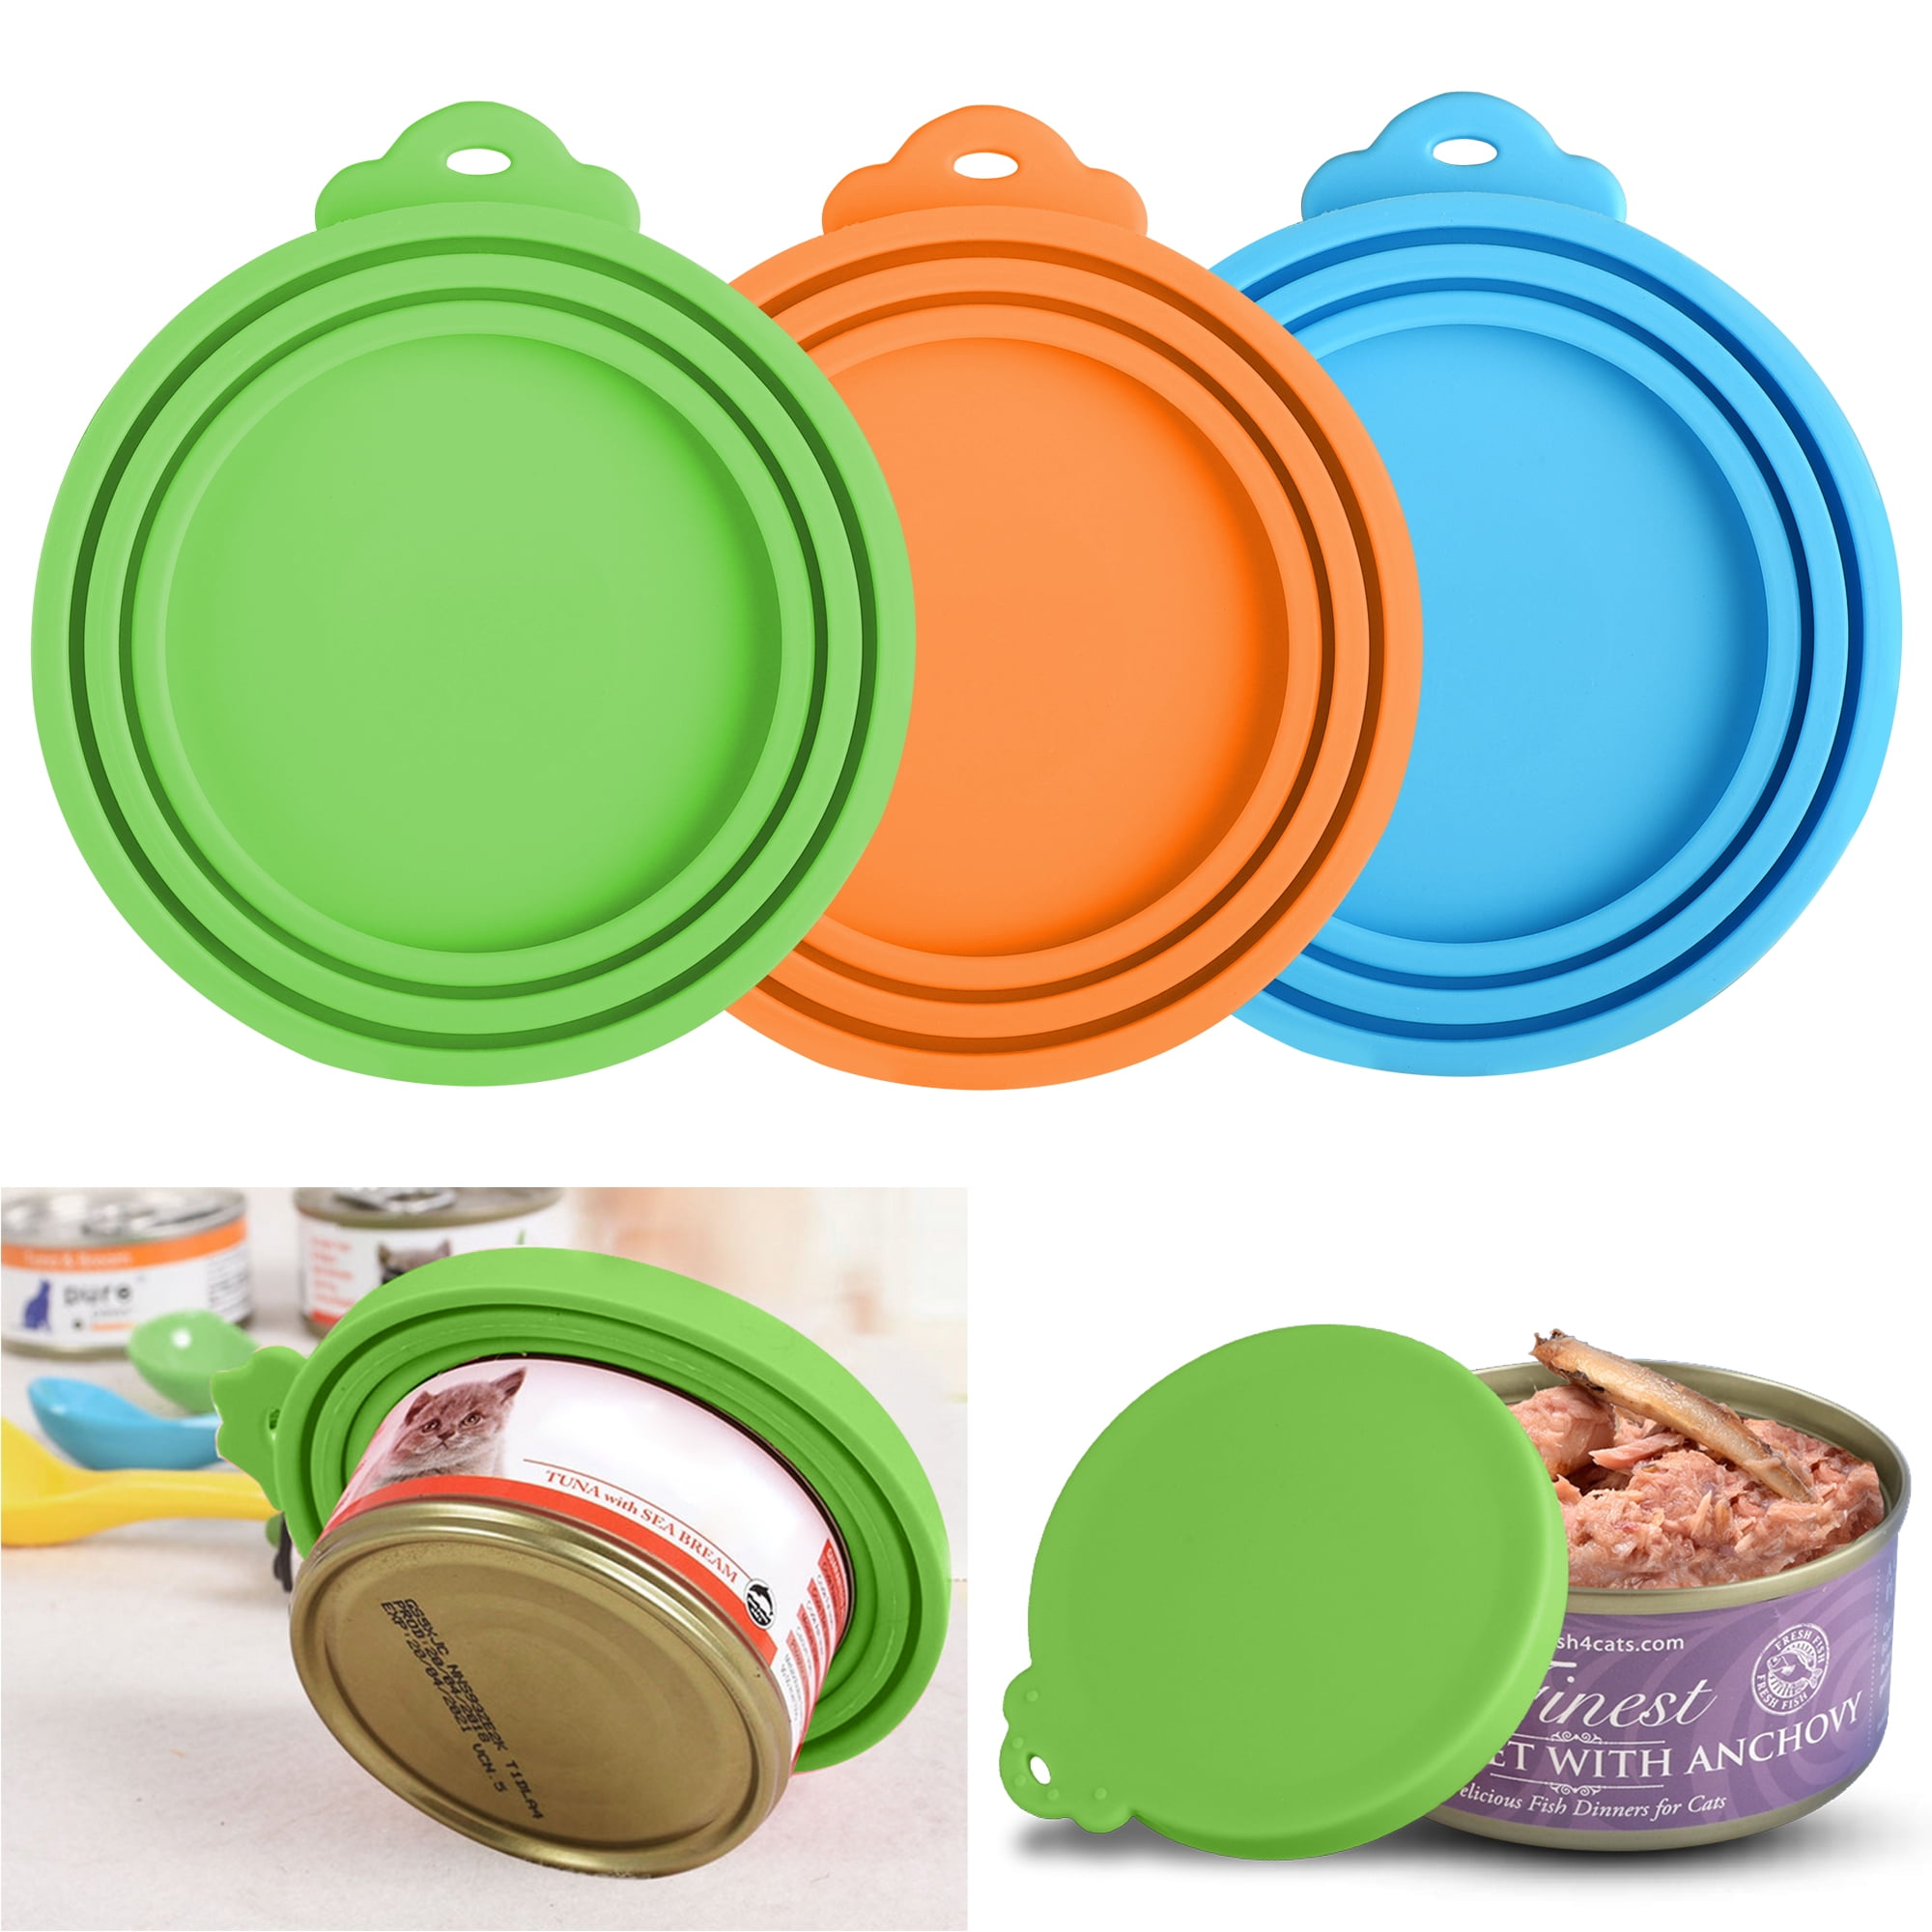 EEEkit 3pcs Silicone Pet Food Can Lids, FDA Safe Dog Cat Food Covers1 Fit 3  Standard Size for Canned Goods Storage 